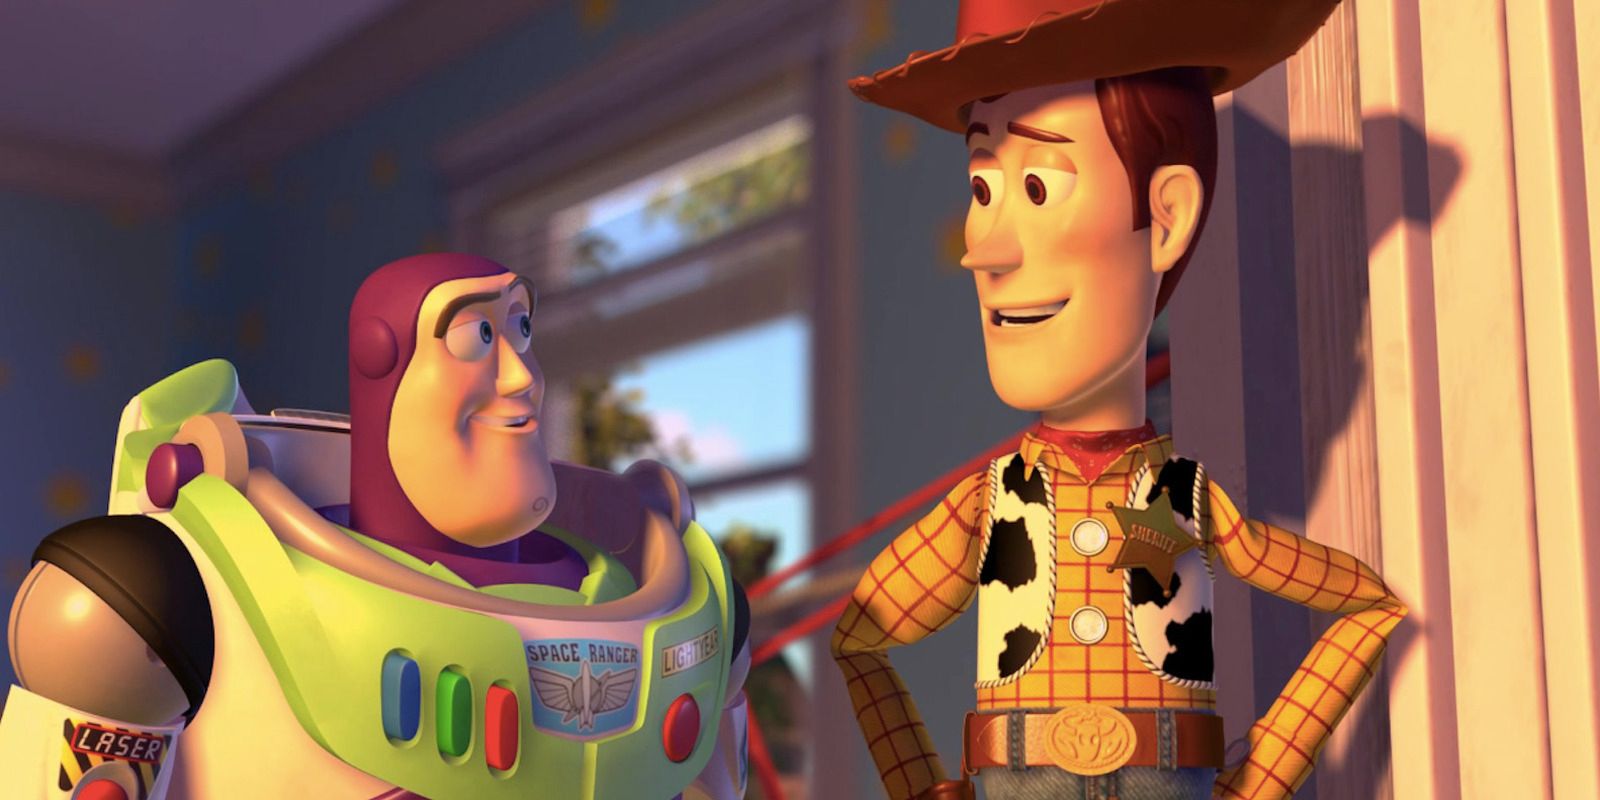 Buzz Lightyear and Woody having a conversation in Toy Story 2